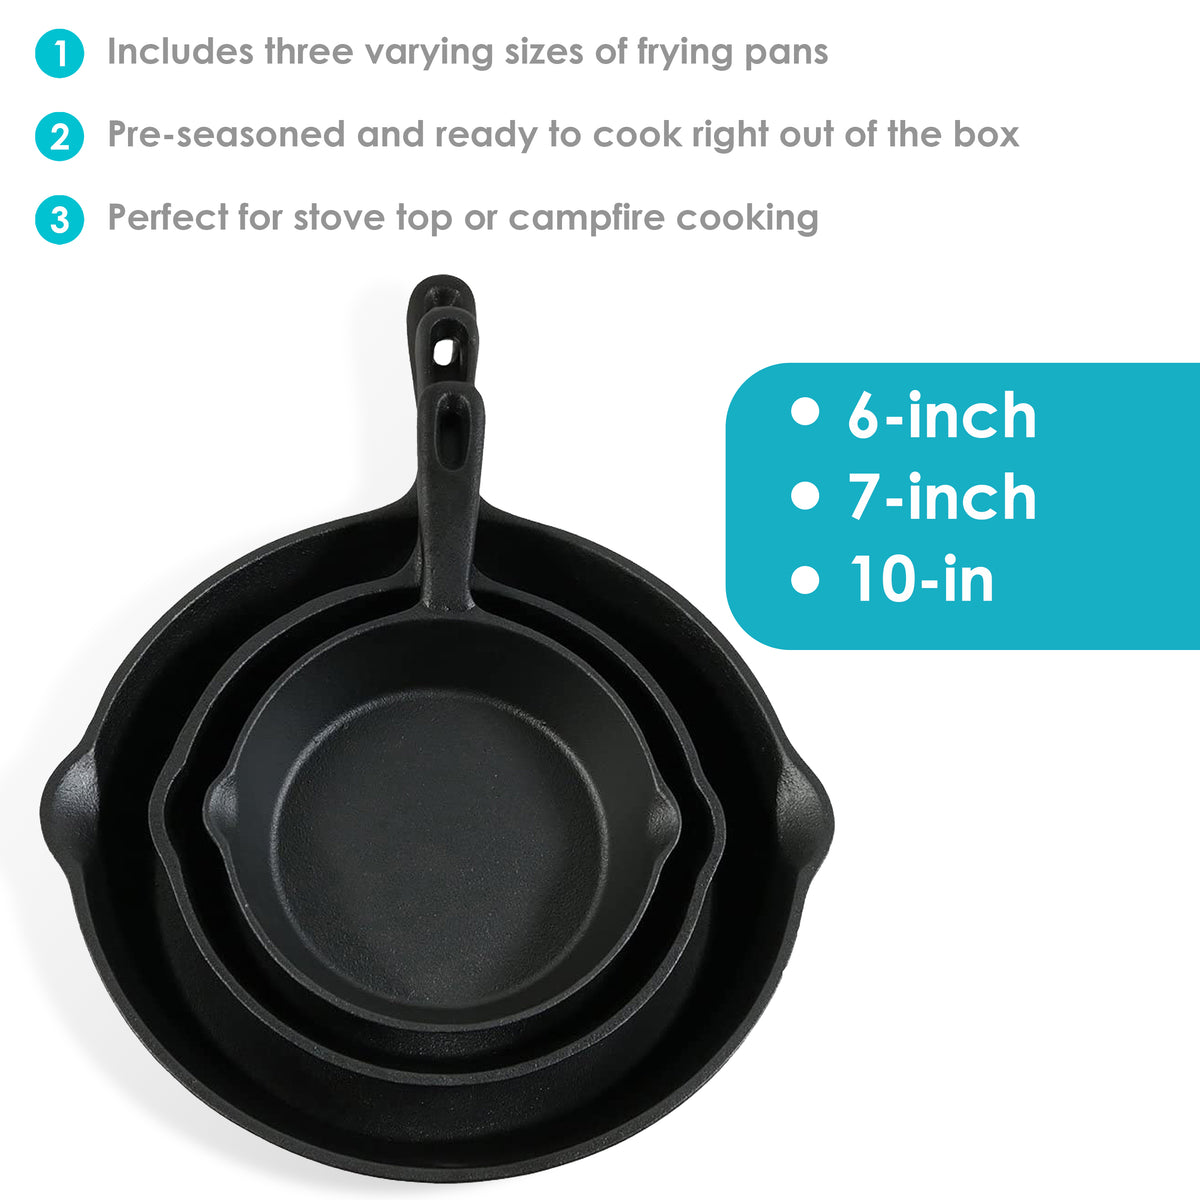 3Pcs/Set 14-26CM Cast Iron Skillet Frying Pan for Gas Induction Cooker –  Country Kitchen Collection